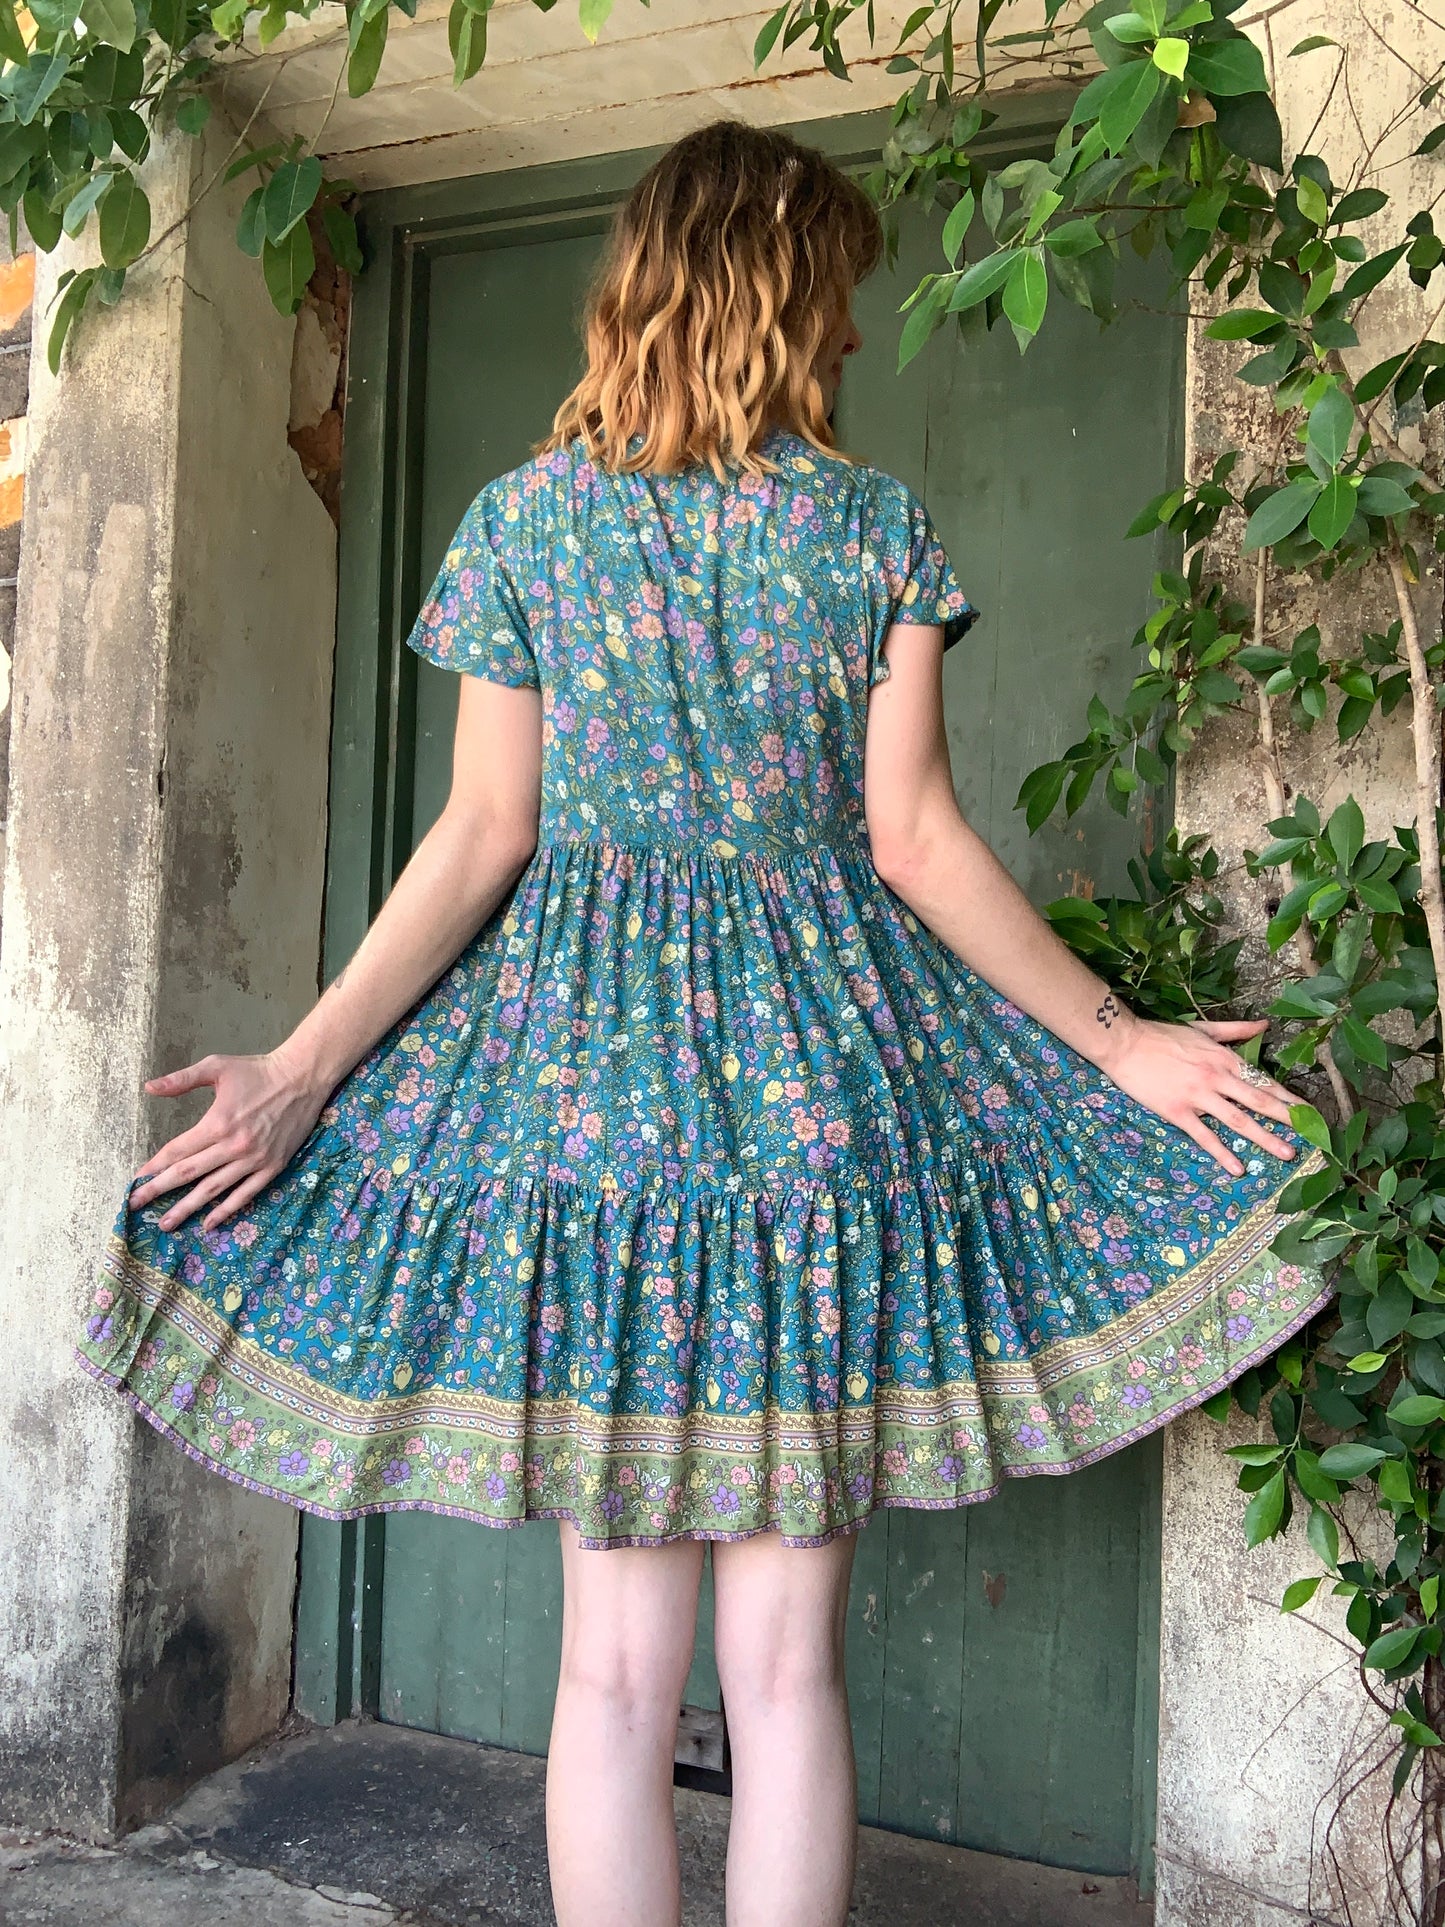 CRY BABY Dress in Country Garden Print - Ginger Pink Darwin - ethical fashion - darwin clothing shop - darwin clothing store - darwin fashion